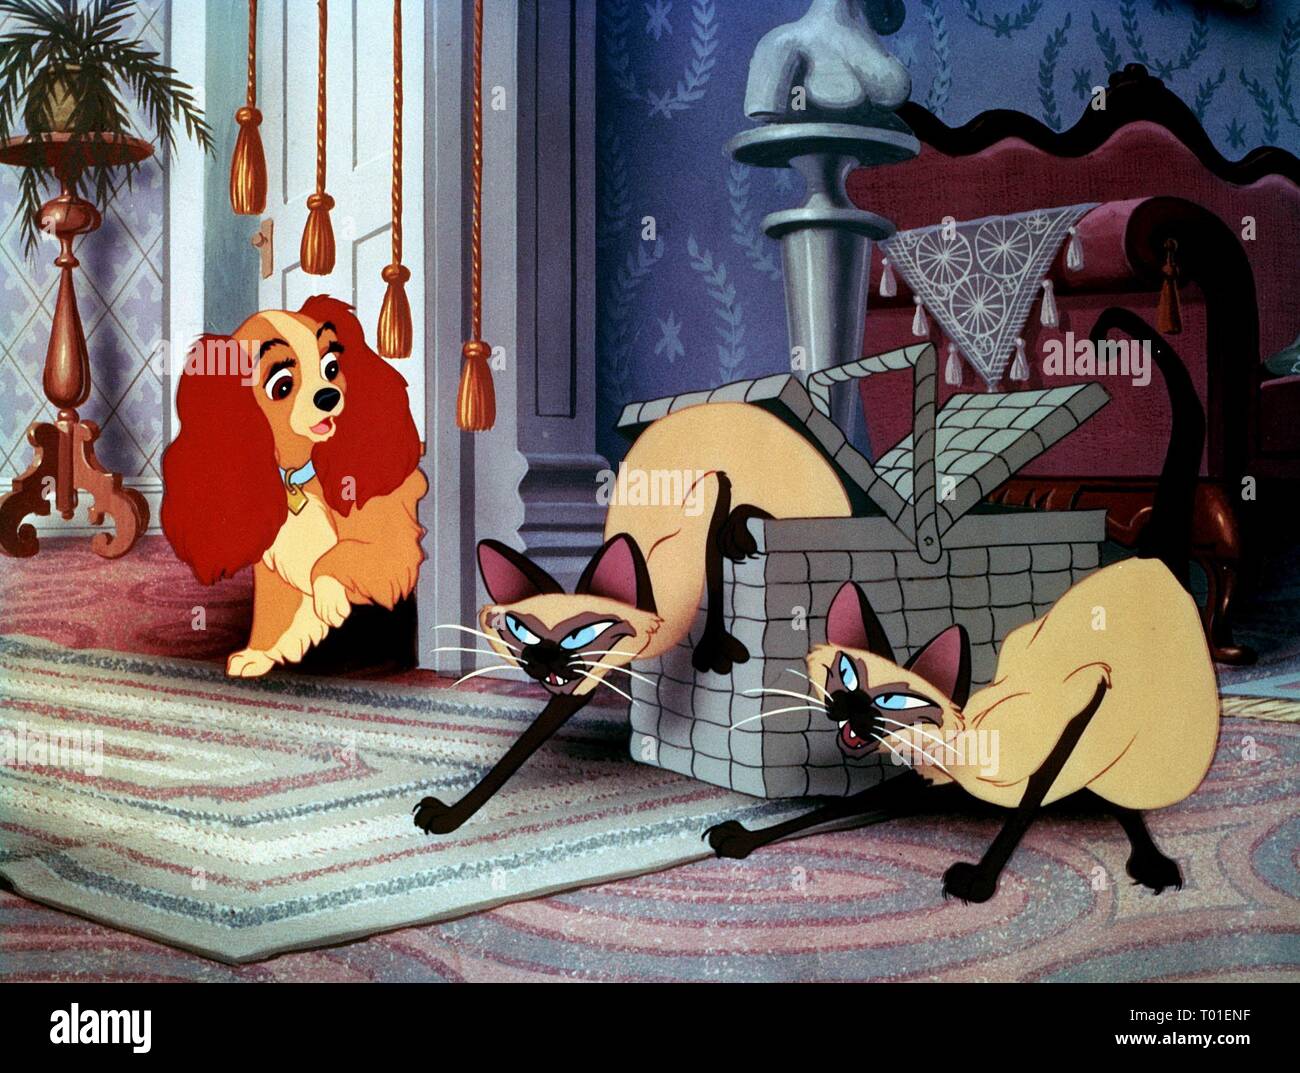 LADY, SI, AM THE SIAMESE CATS, LADY AND THE TRAMP, 1955 Stock Photo